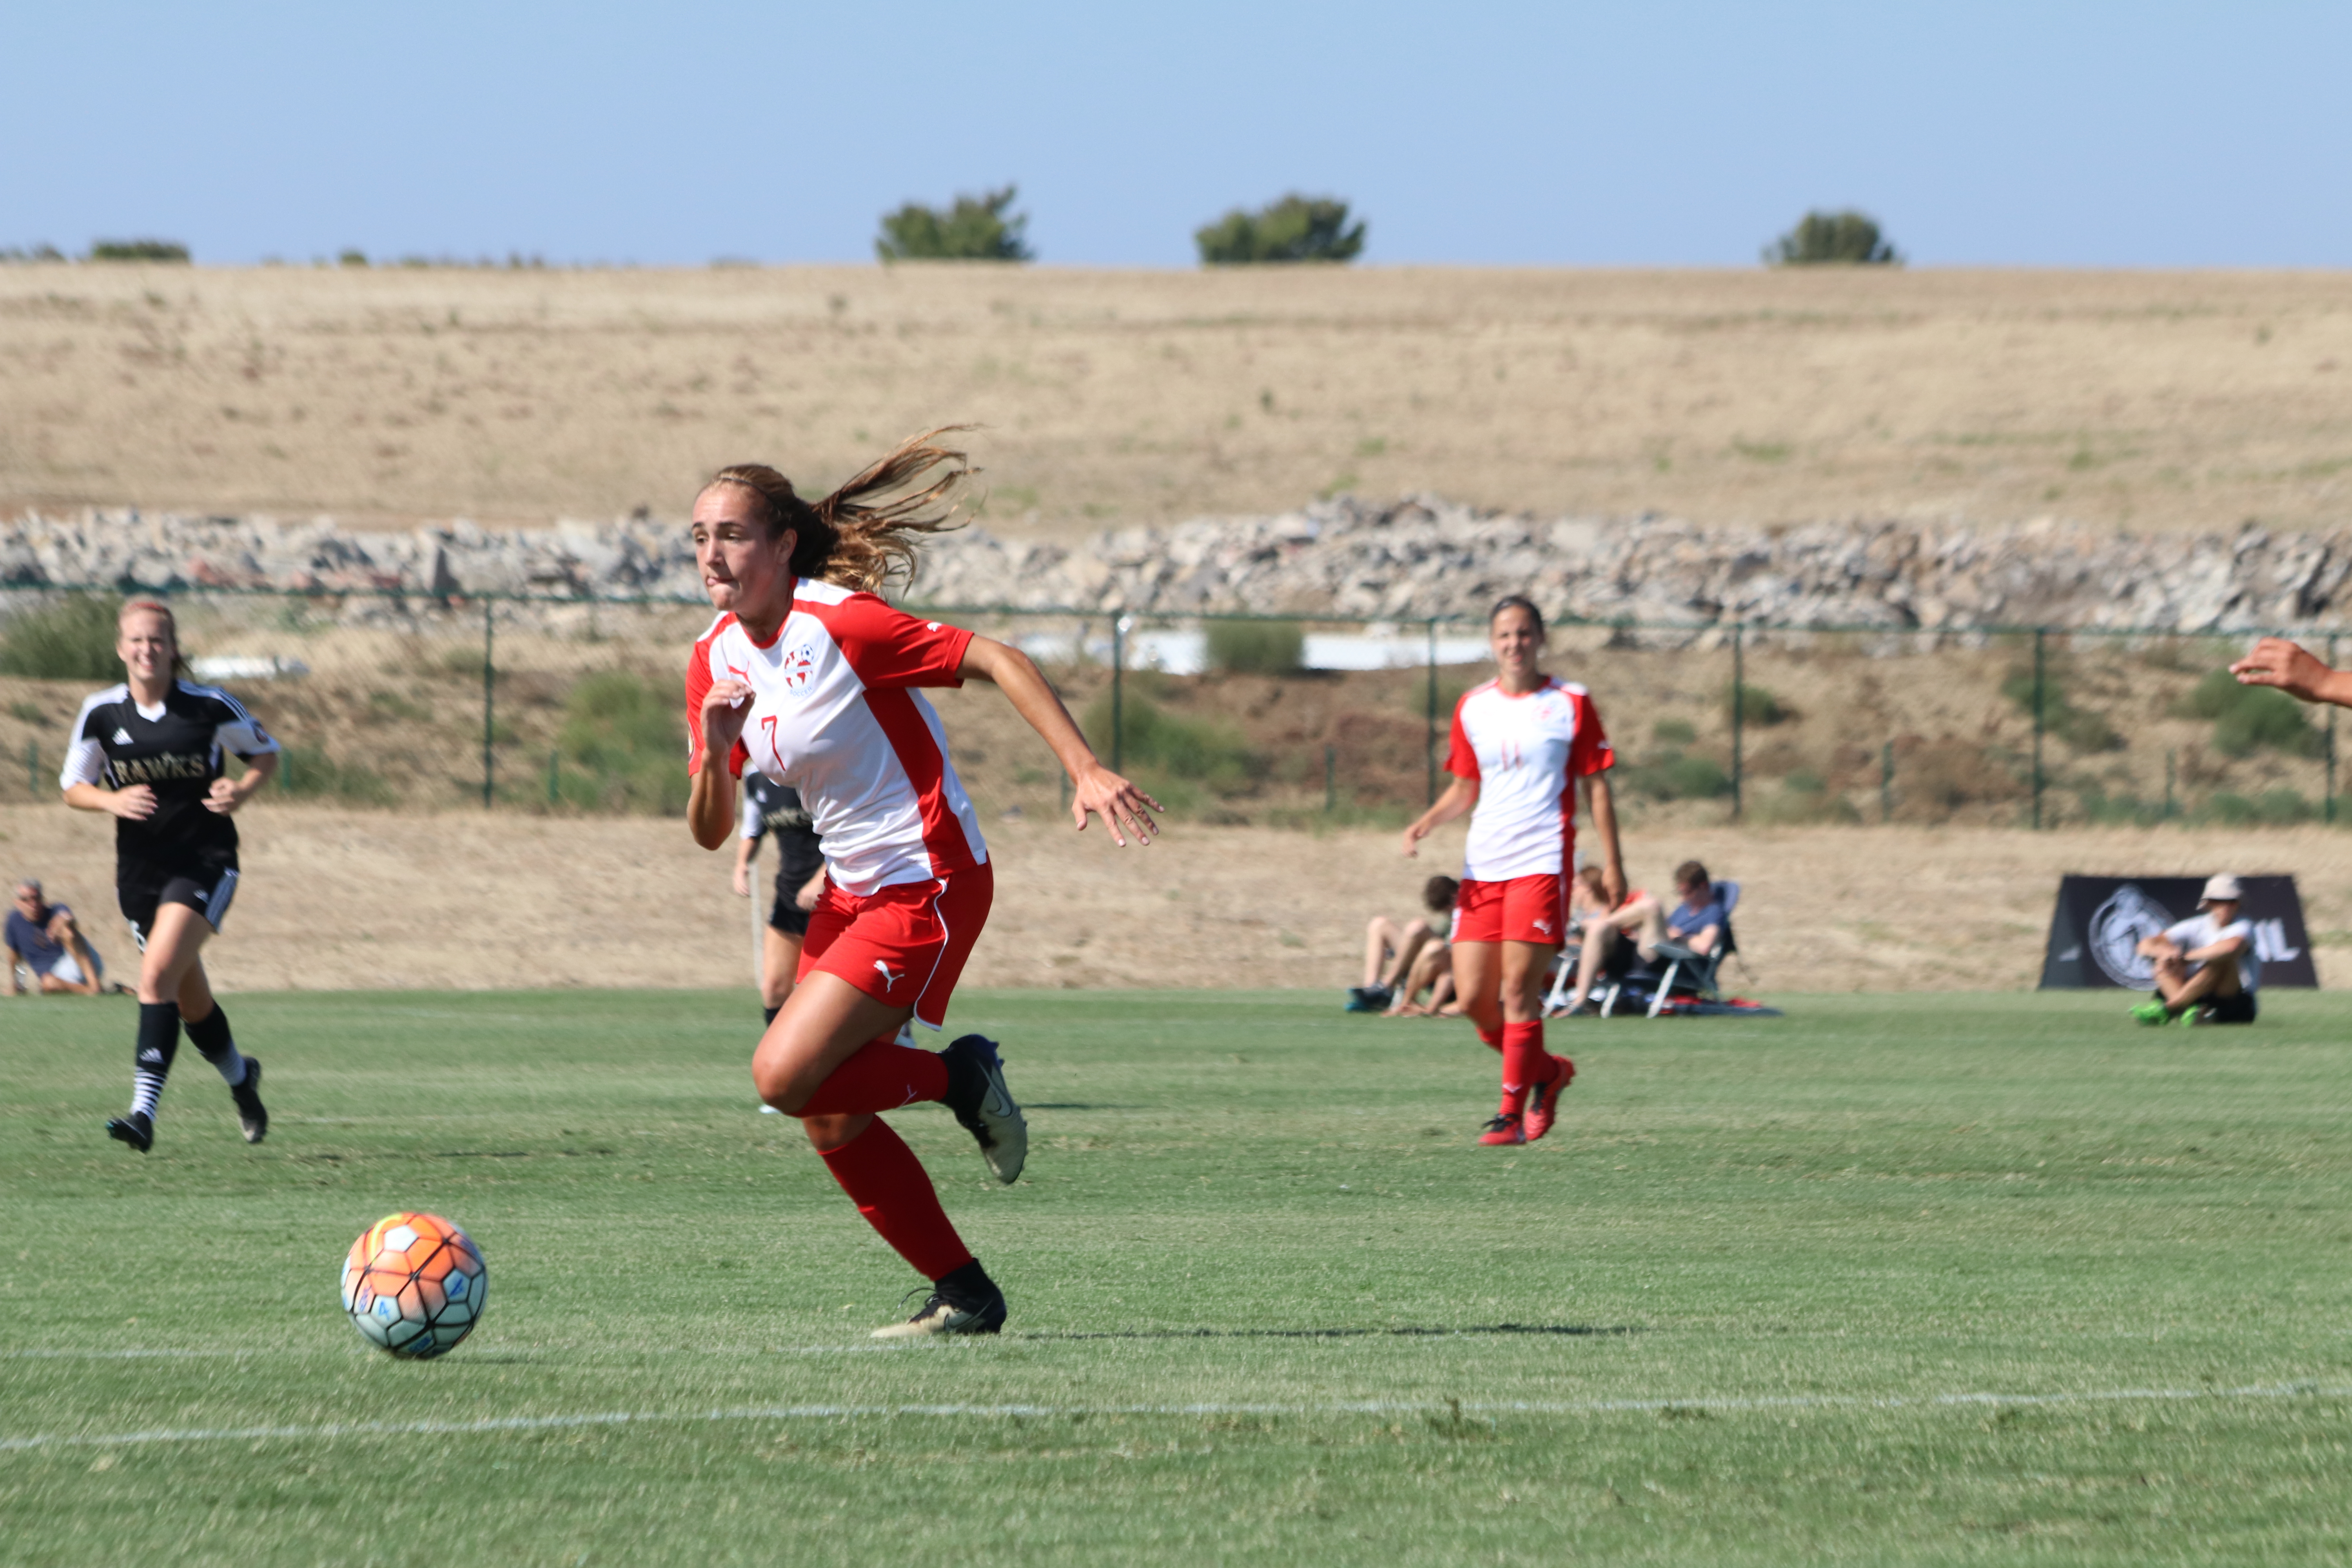 Youth Soccer News: Three Internationals SC Players Called Up for U.S. U18 Women’s National Team Training Camp